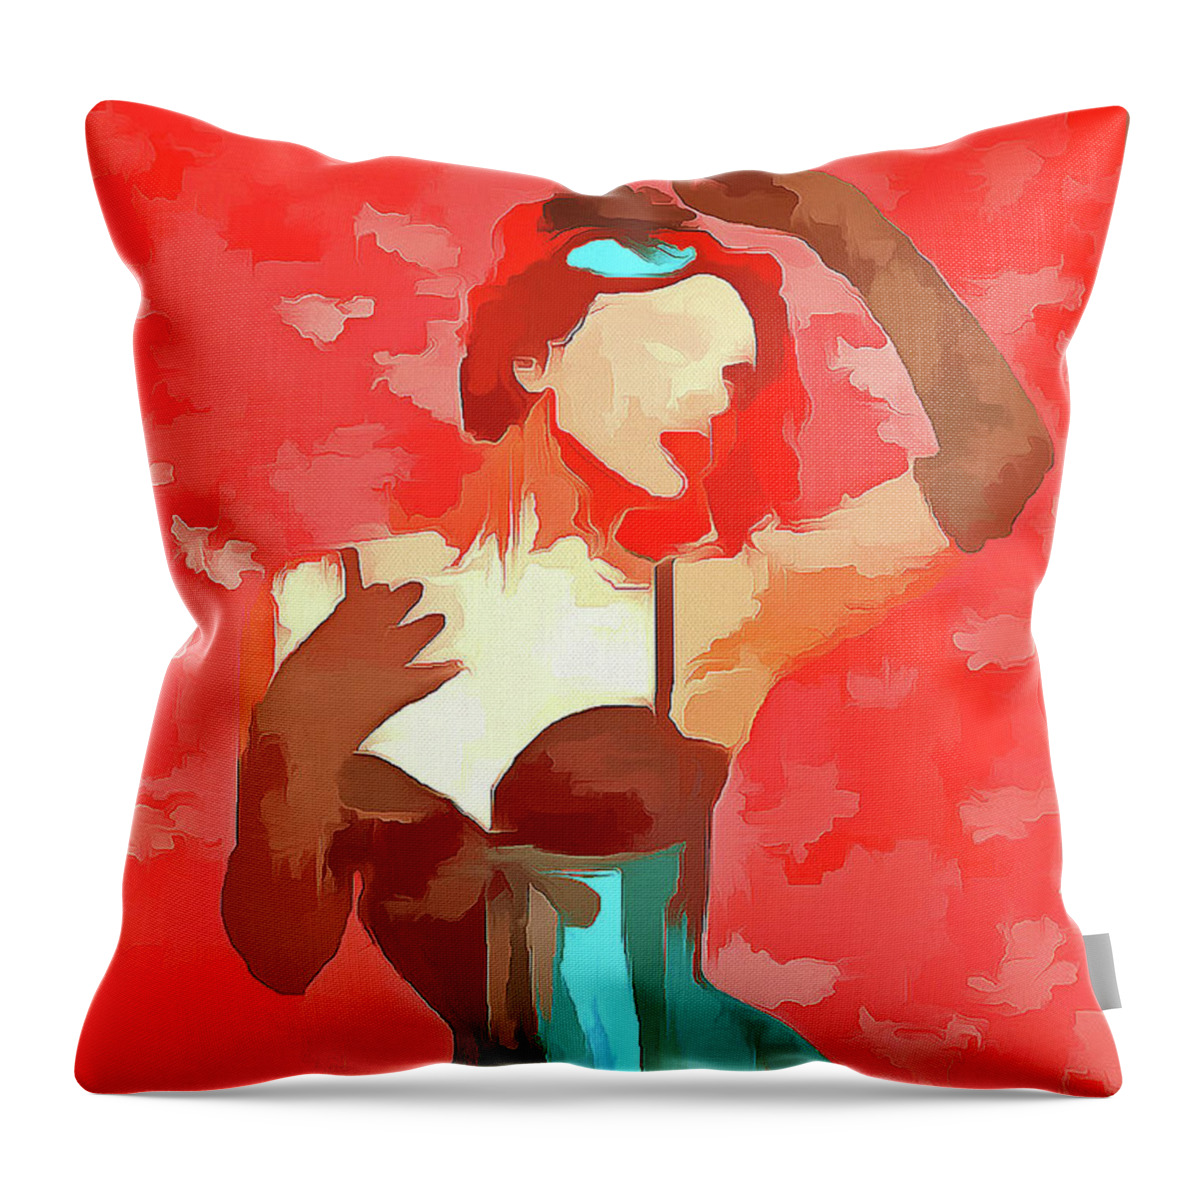 Lady Throw Pillow featuring the digital art Burlesque Red by Humphrey Isselt